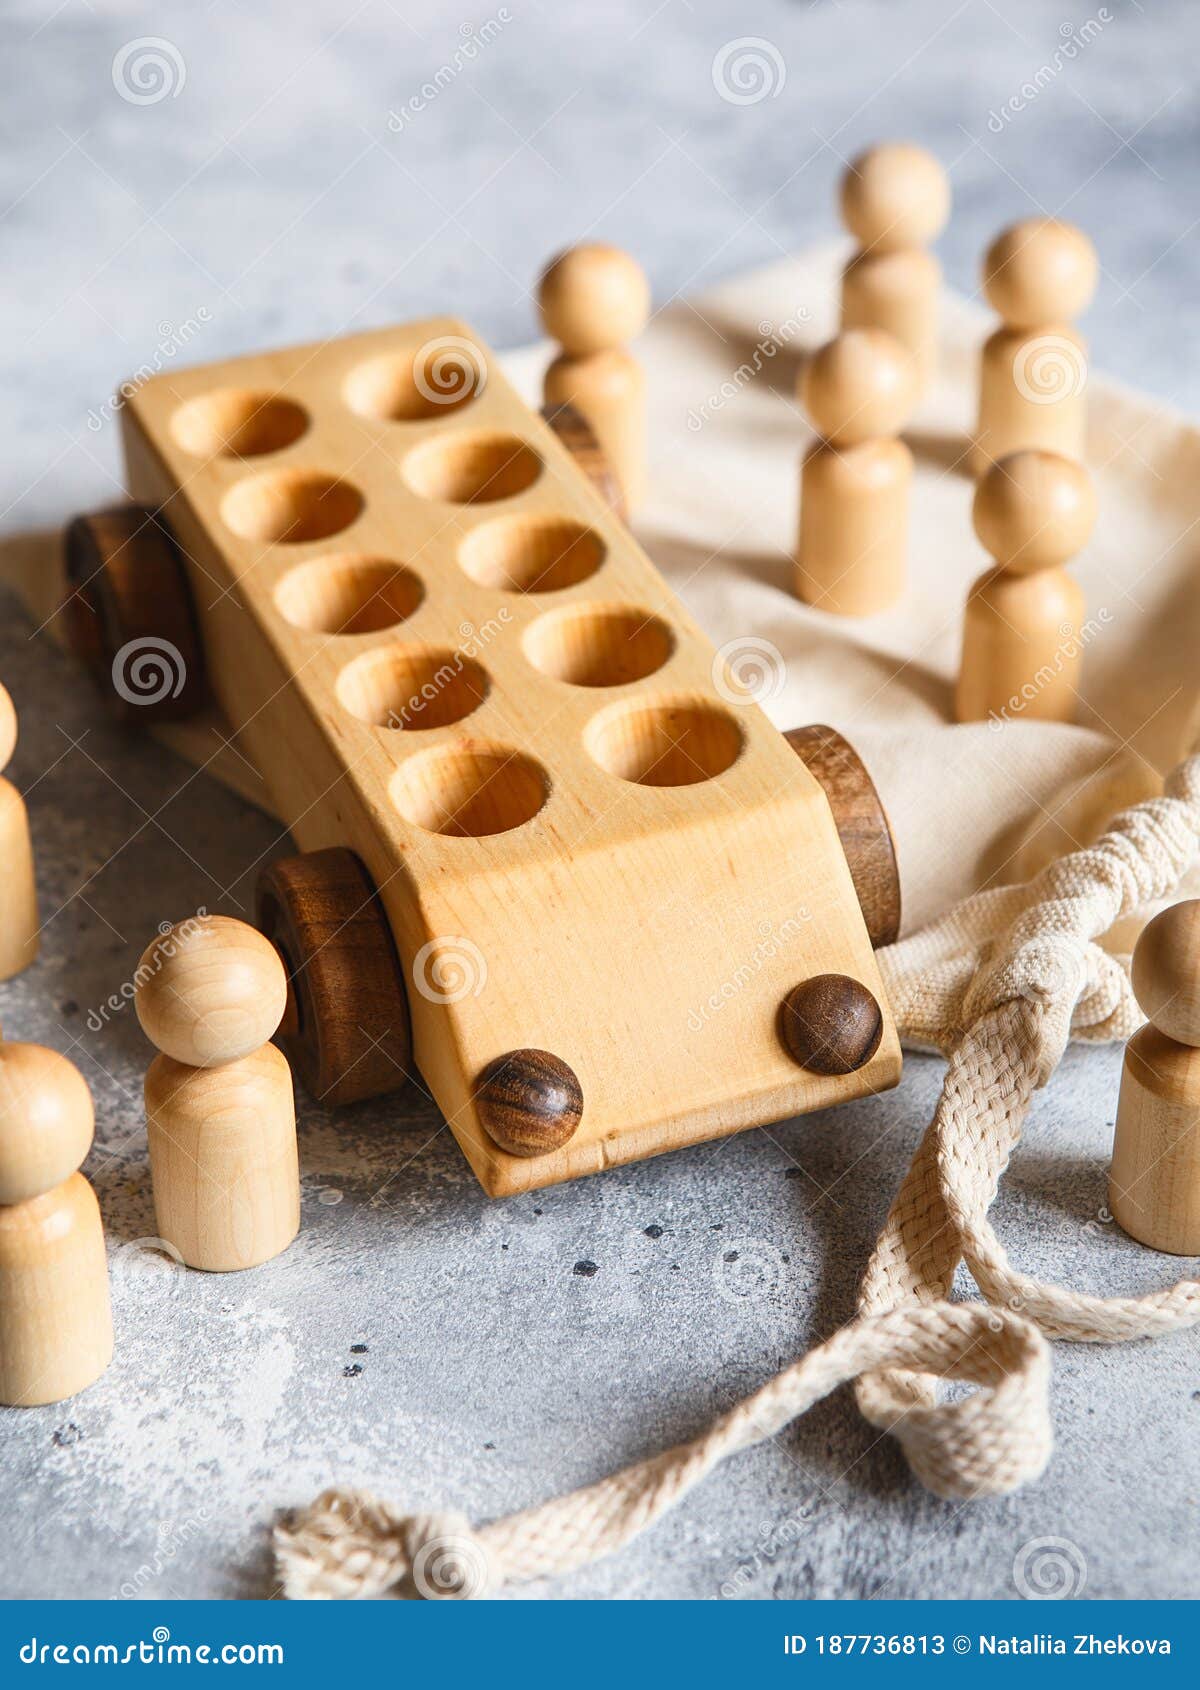 natural wooden toys for babies and toddlers